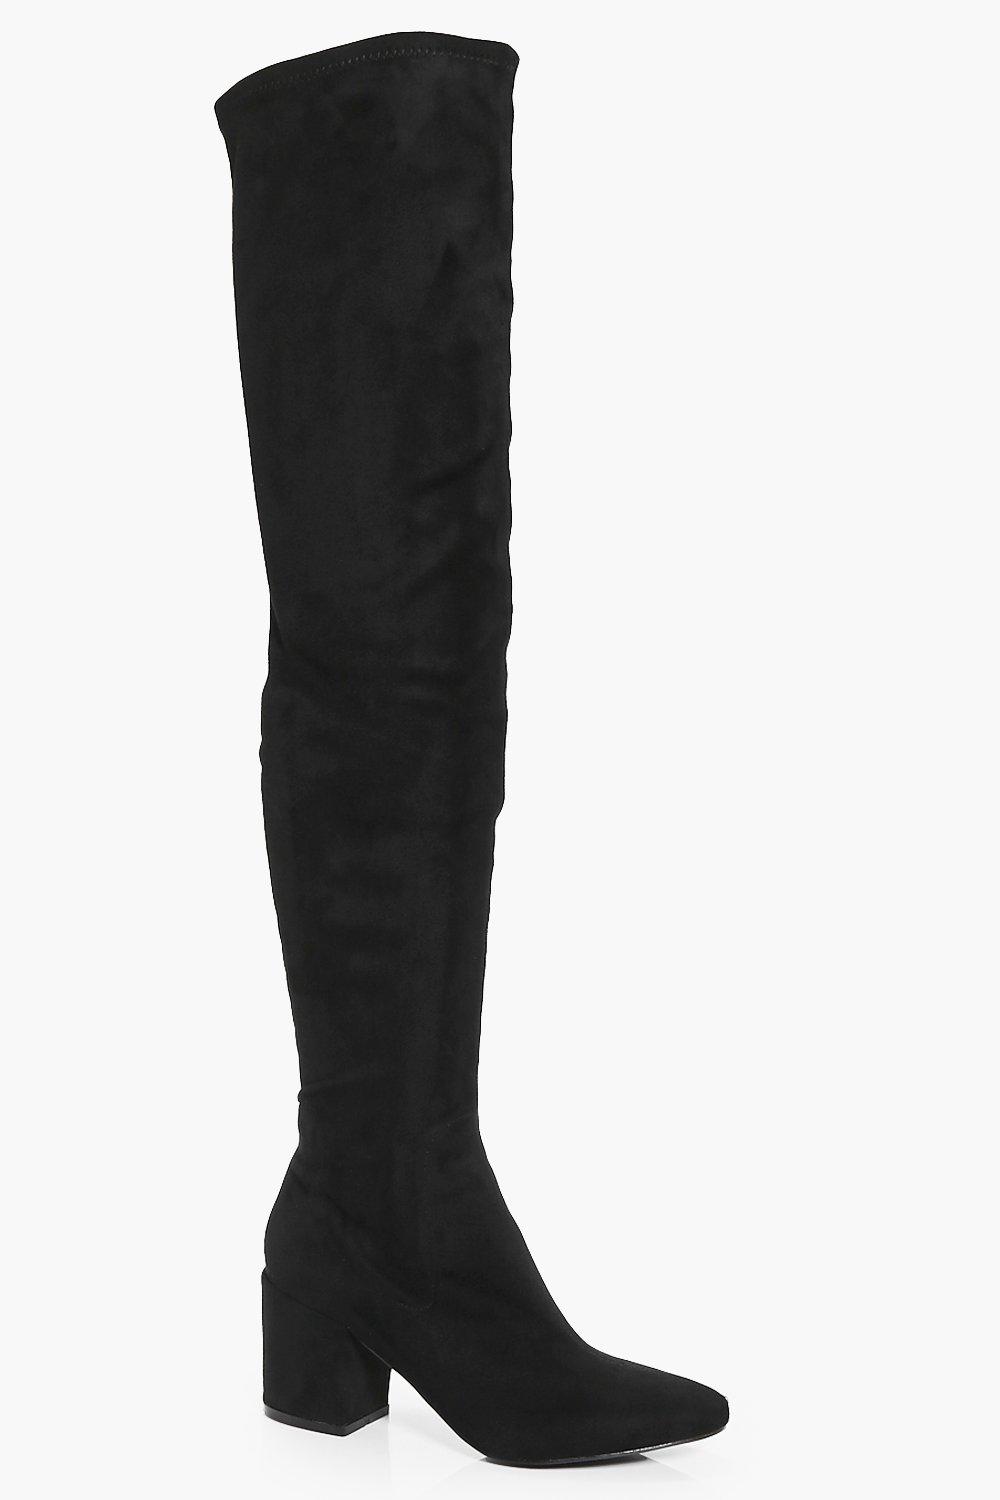 thigh high boots small heel